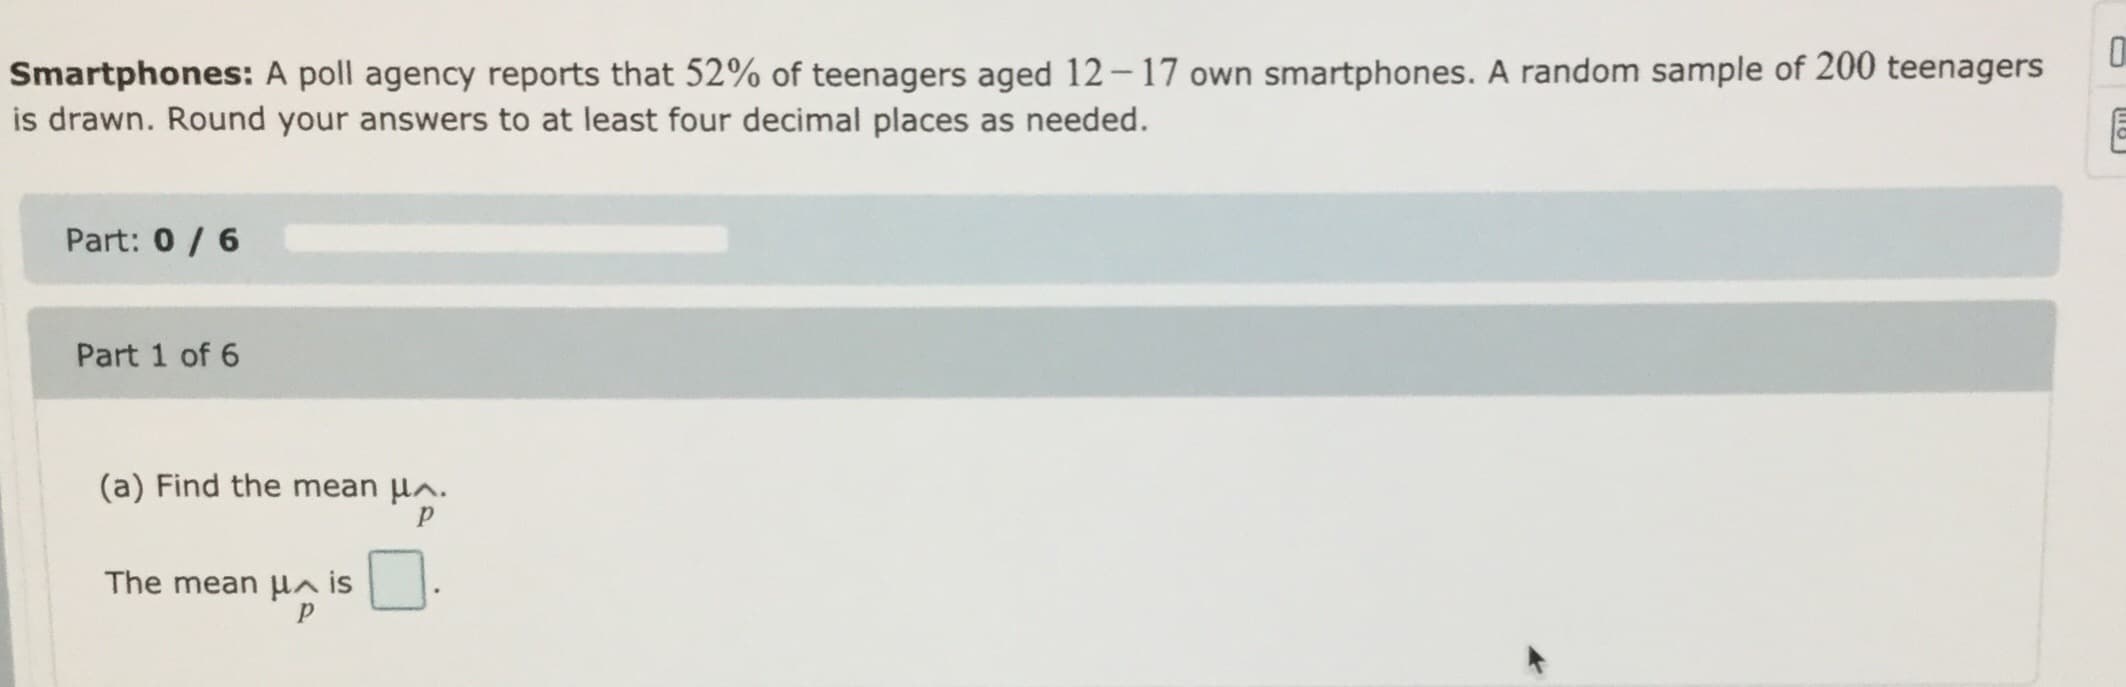 O
Smartphones: A poll agency reports that 52% of teenagers aged 12-17 own smartphones. A random sample of 200 teenagers
is drawn. Round your answers to at least four decimal places as needed.
Part: 0/6
Part 1 of 6
(a) Find the mean HA.
P
The mean HA is
on
